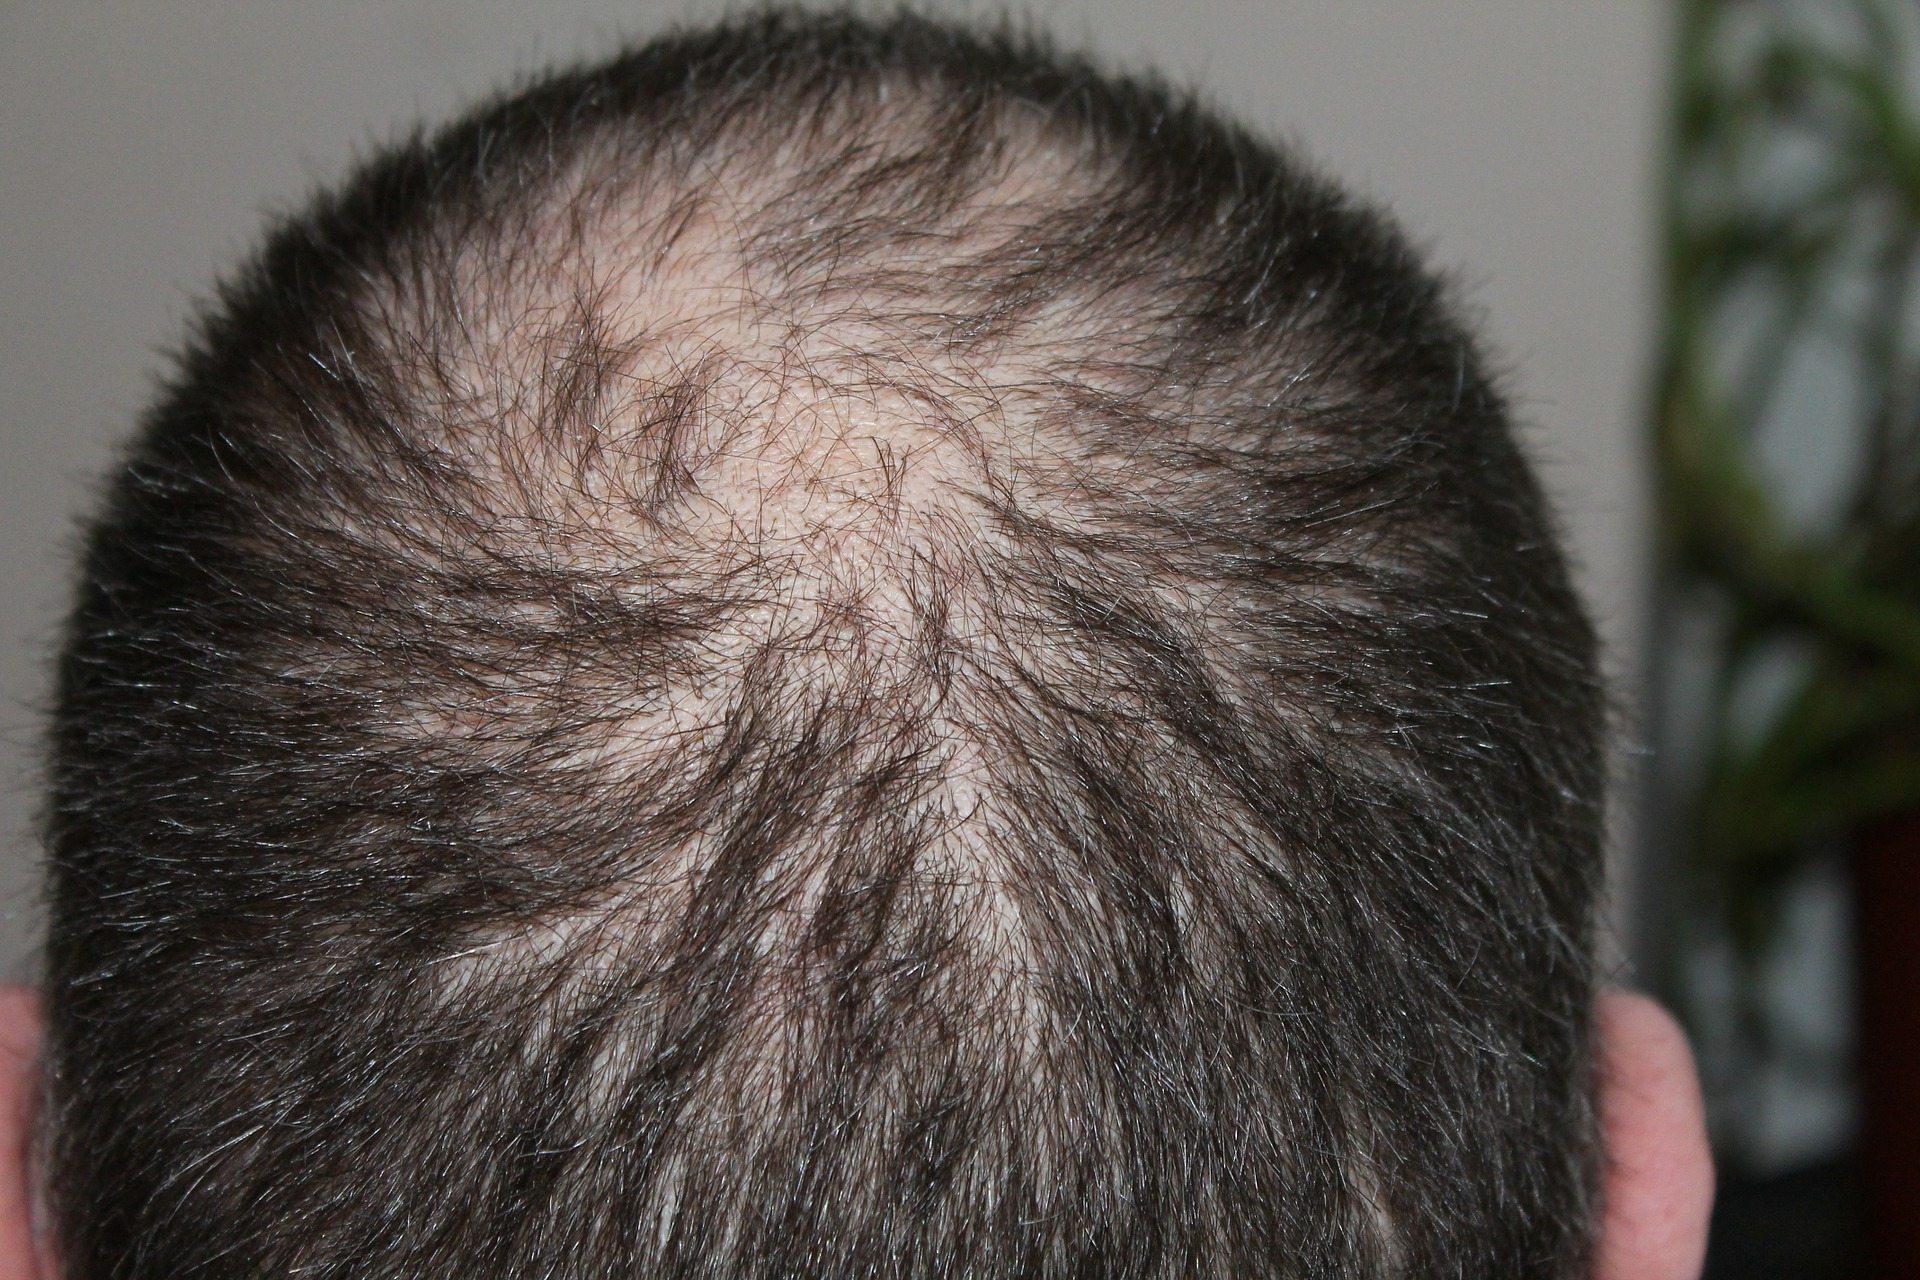 Osteoporosis drug side effects could be key to treating hair loss